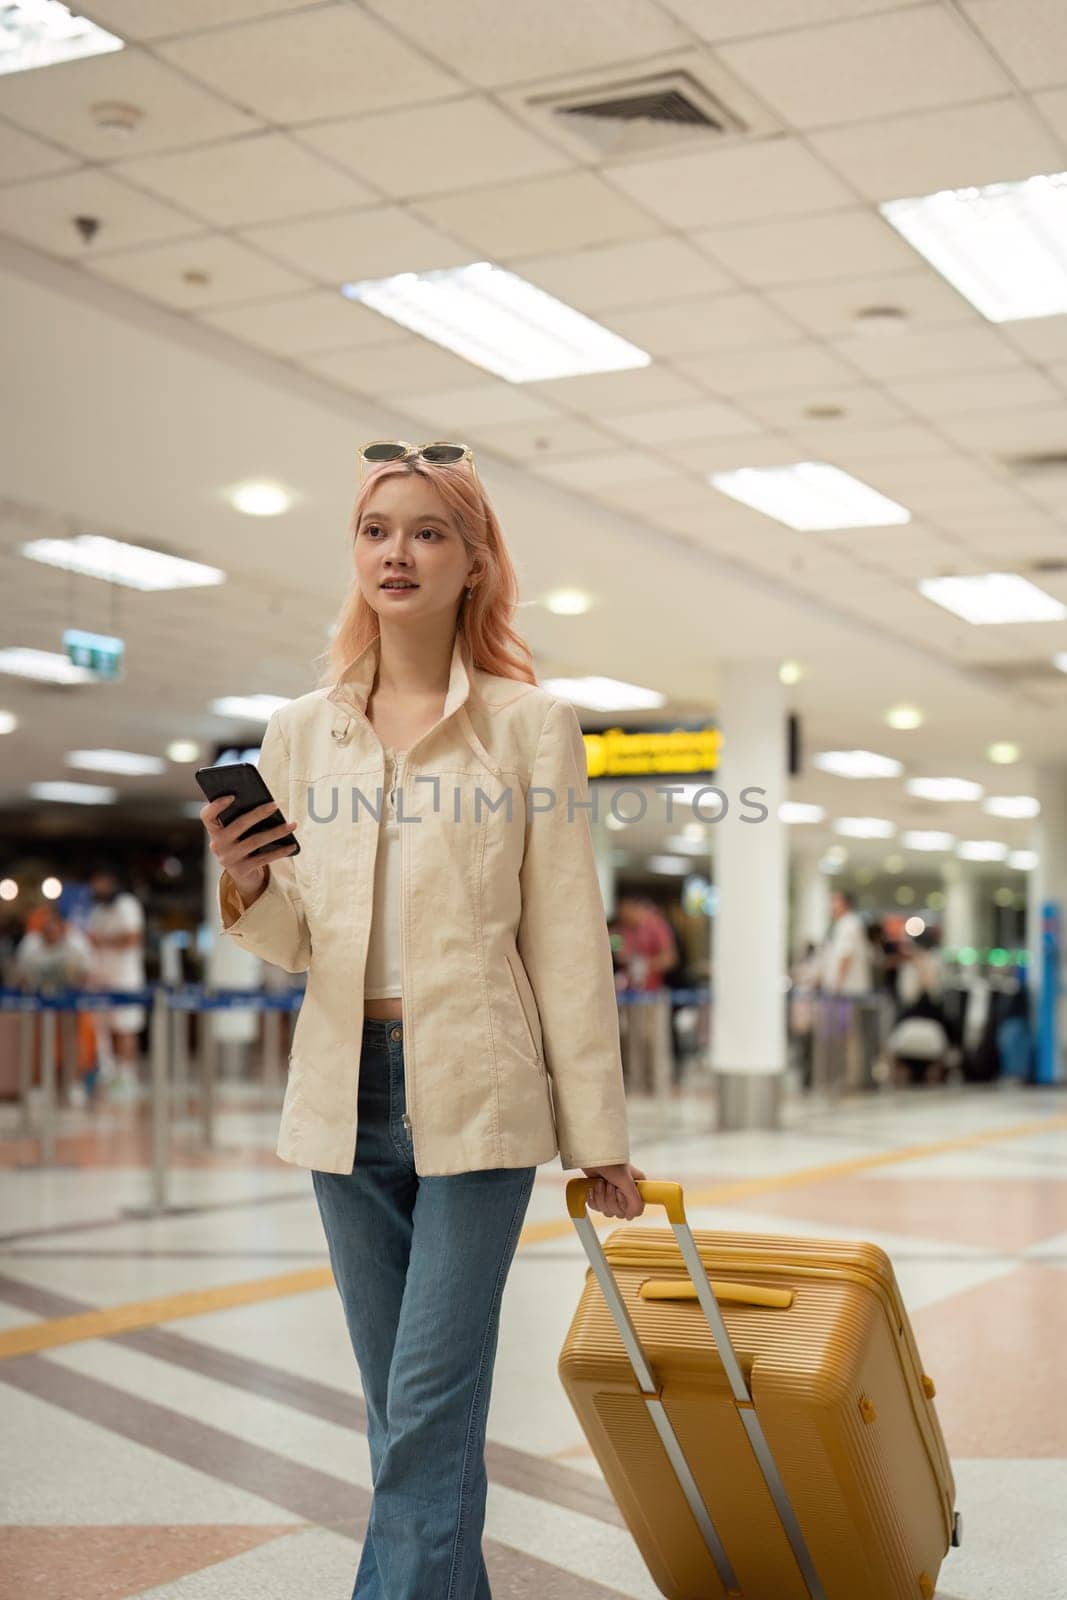 A woman asian walking in an airport. Mobile, suitcase and travel with a young female on an international trip for work or travel.